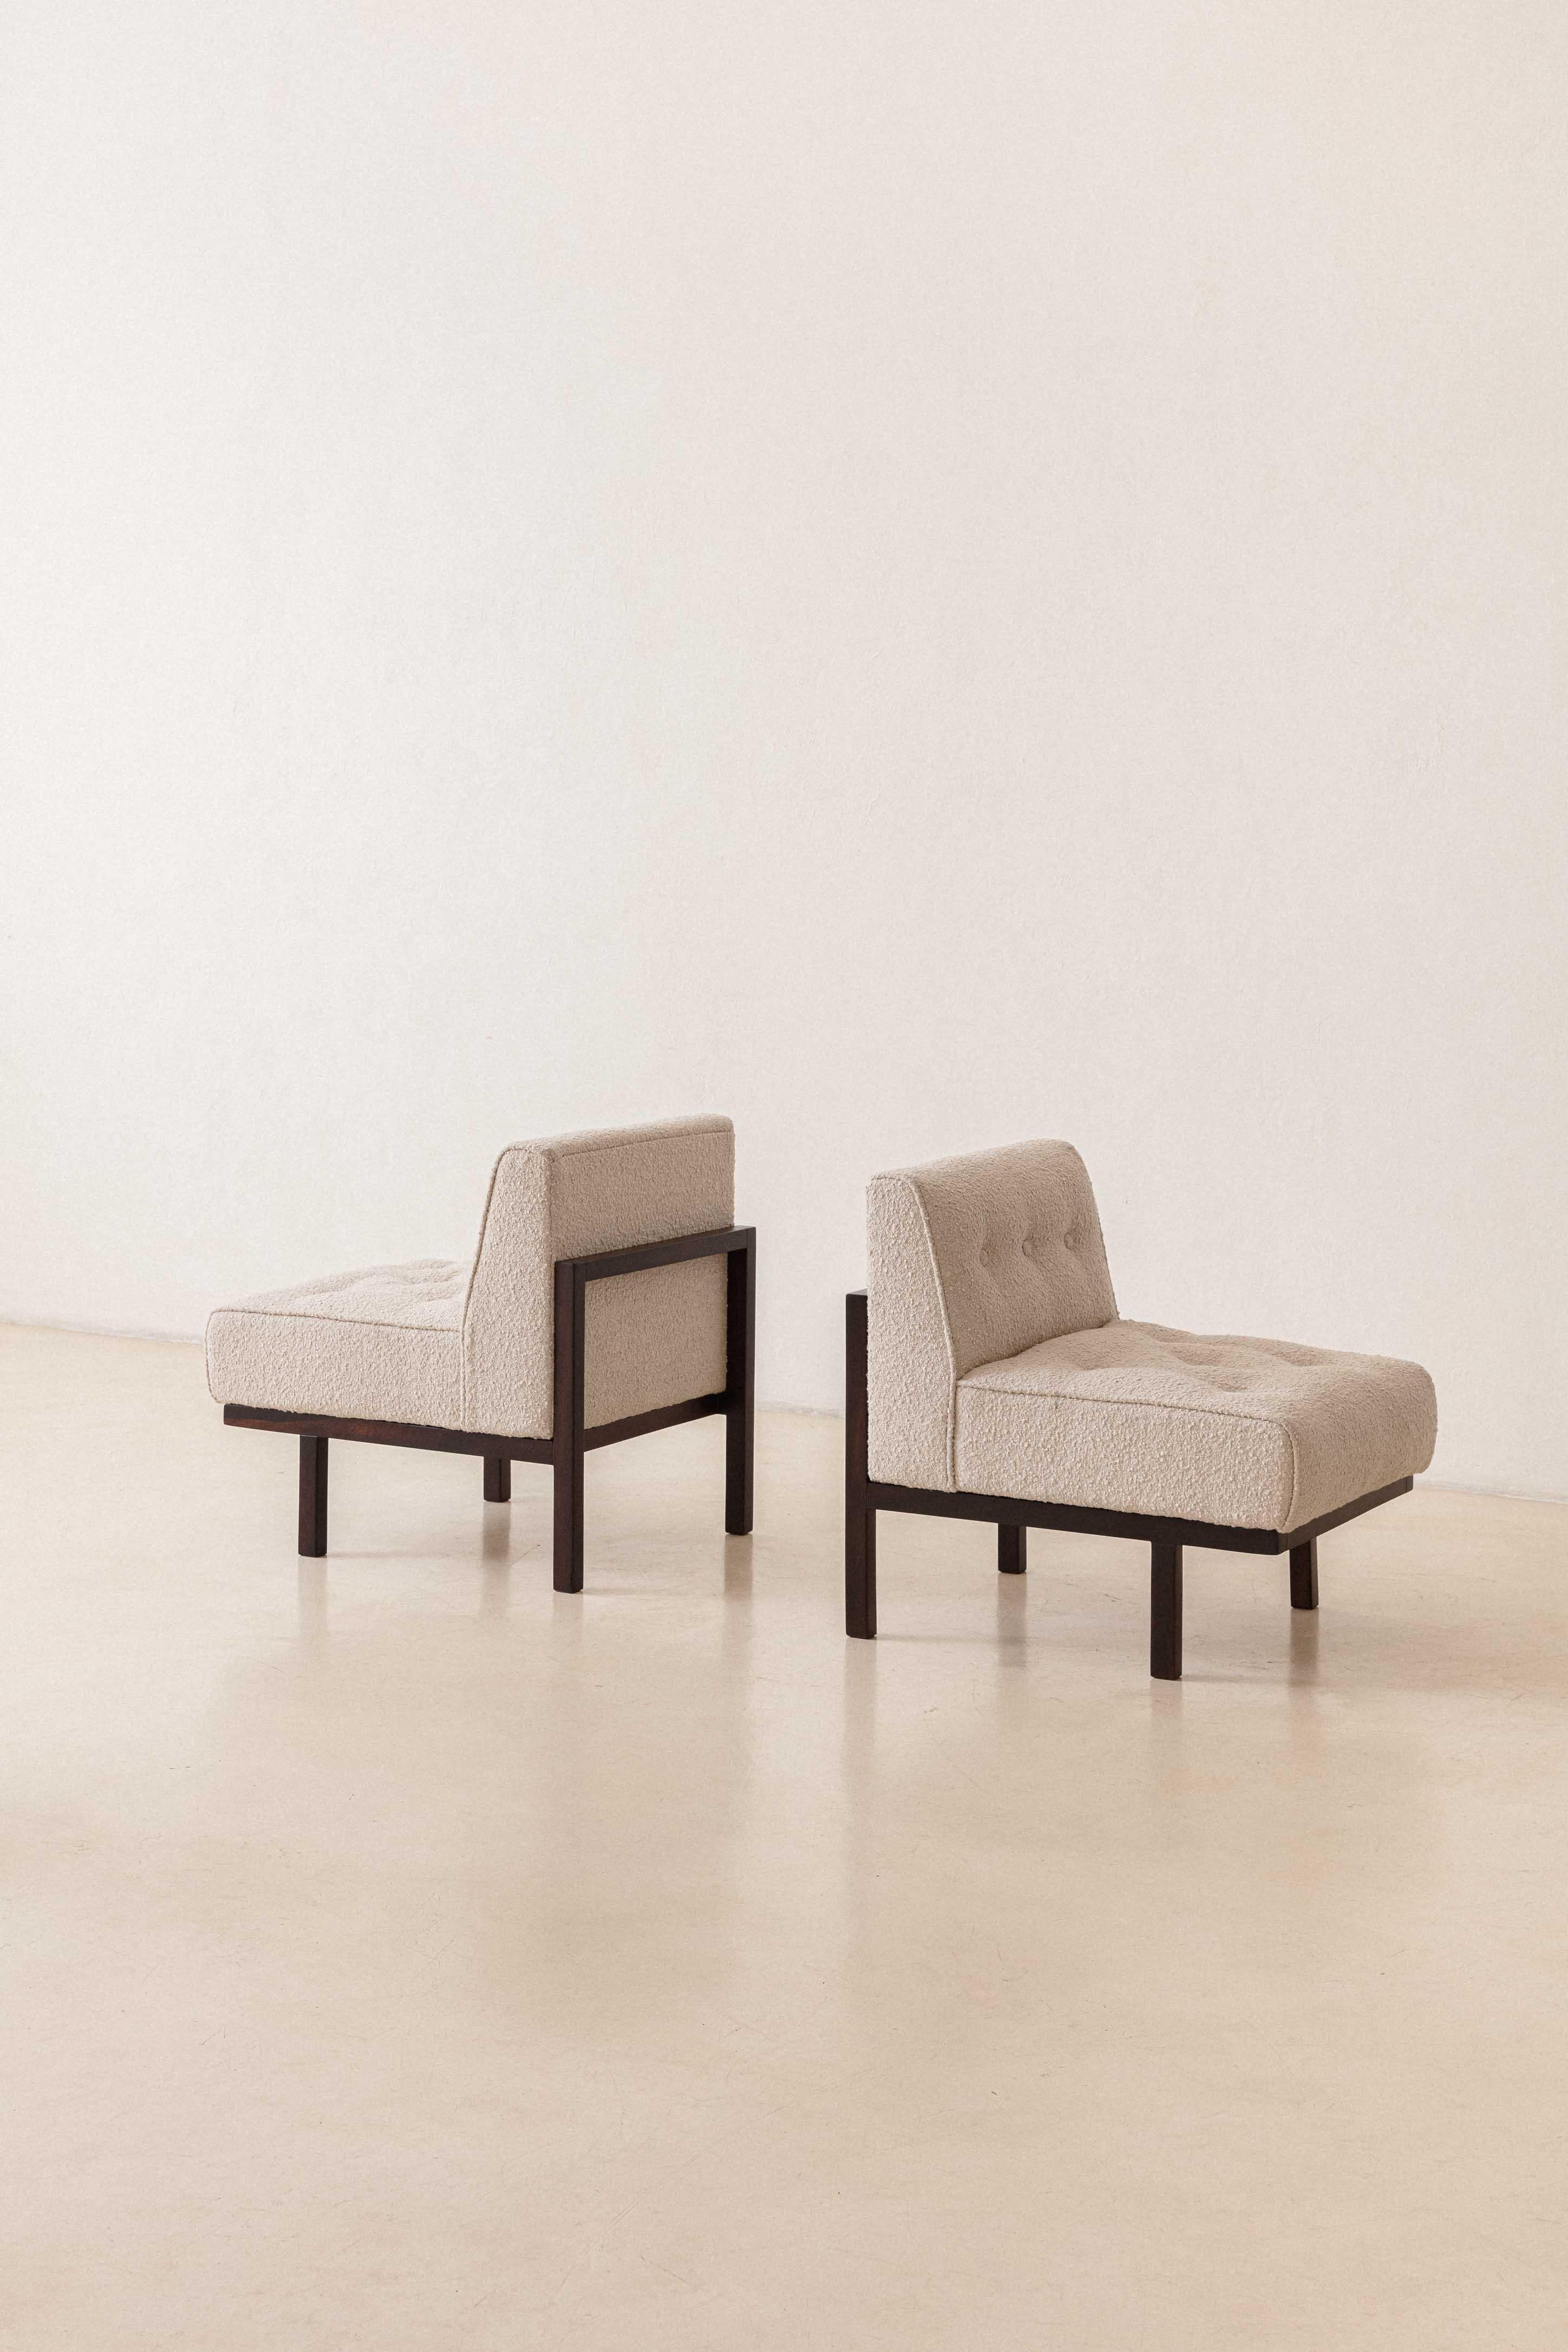 Mid-20th Century Pair of M1 Armchairs by Brazilian Company Branco & Preto, Midcentury, 1952 For Sale